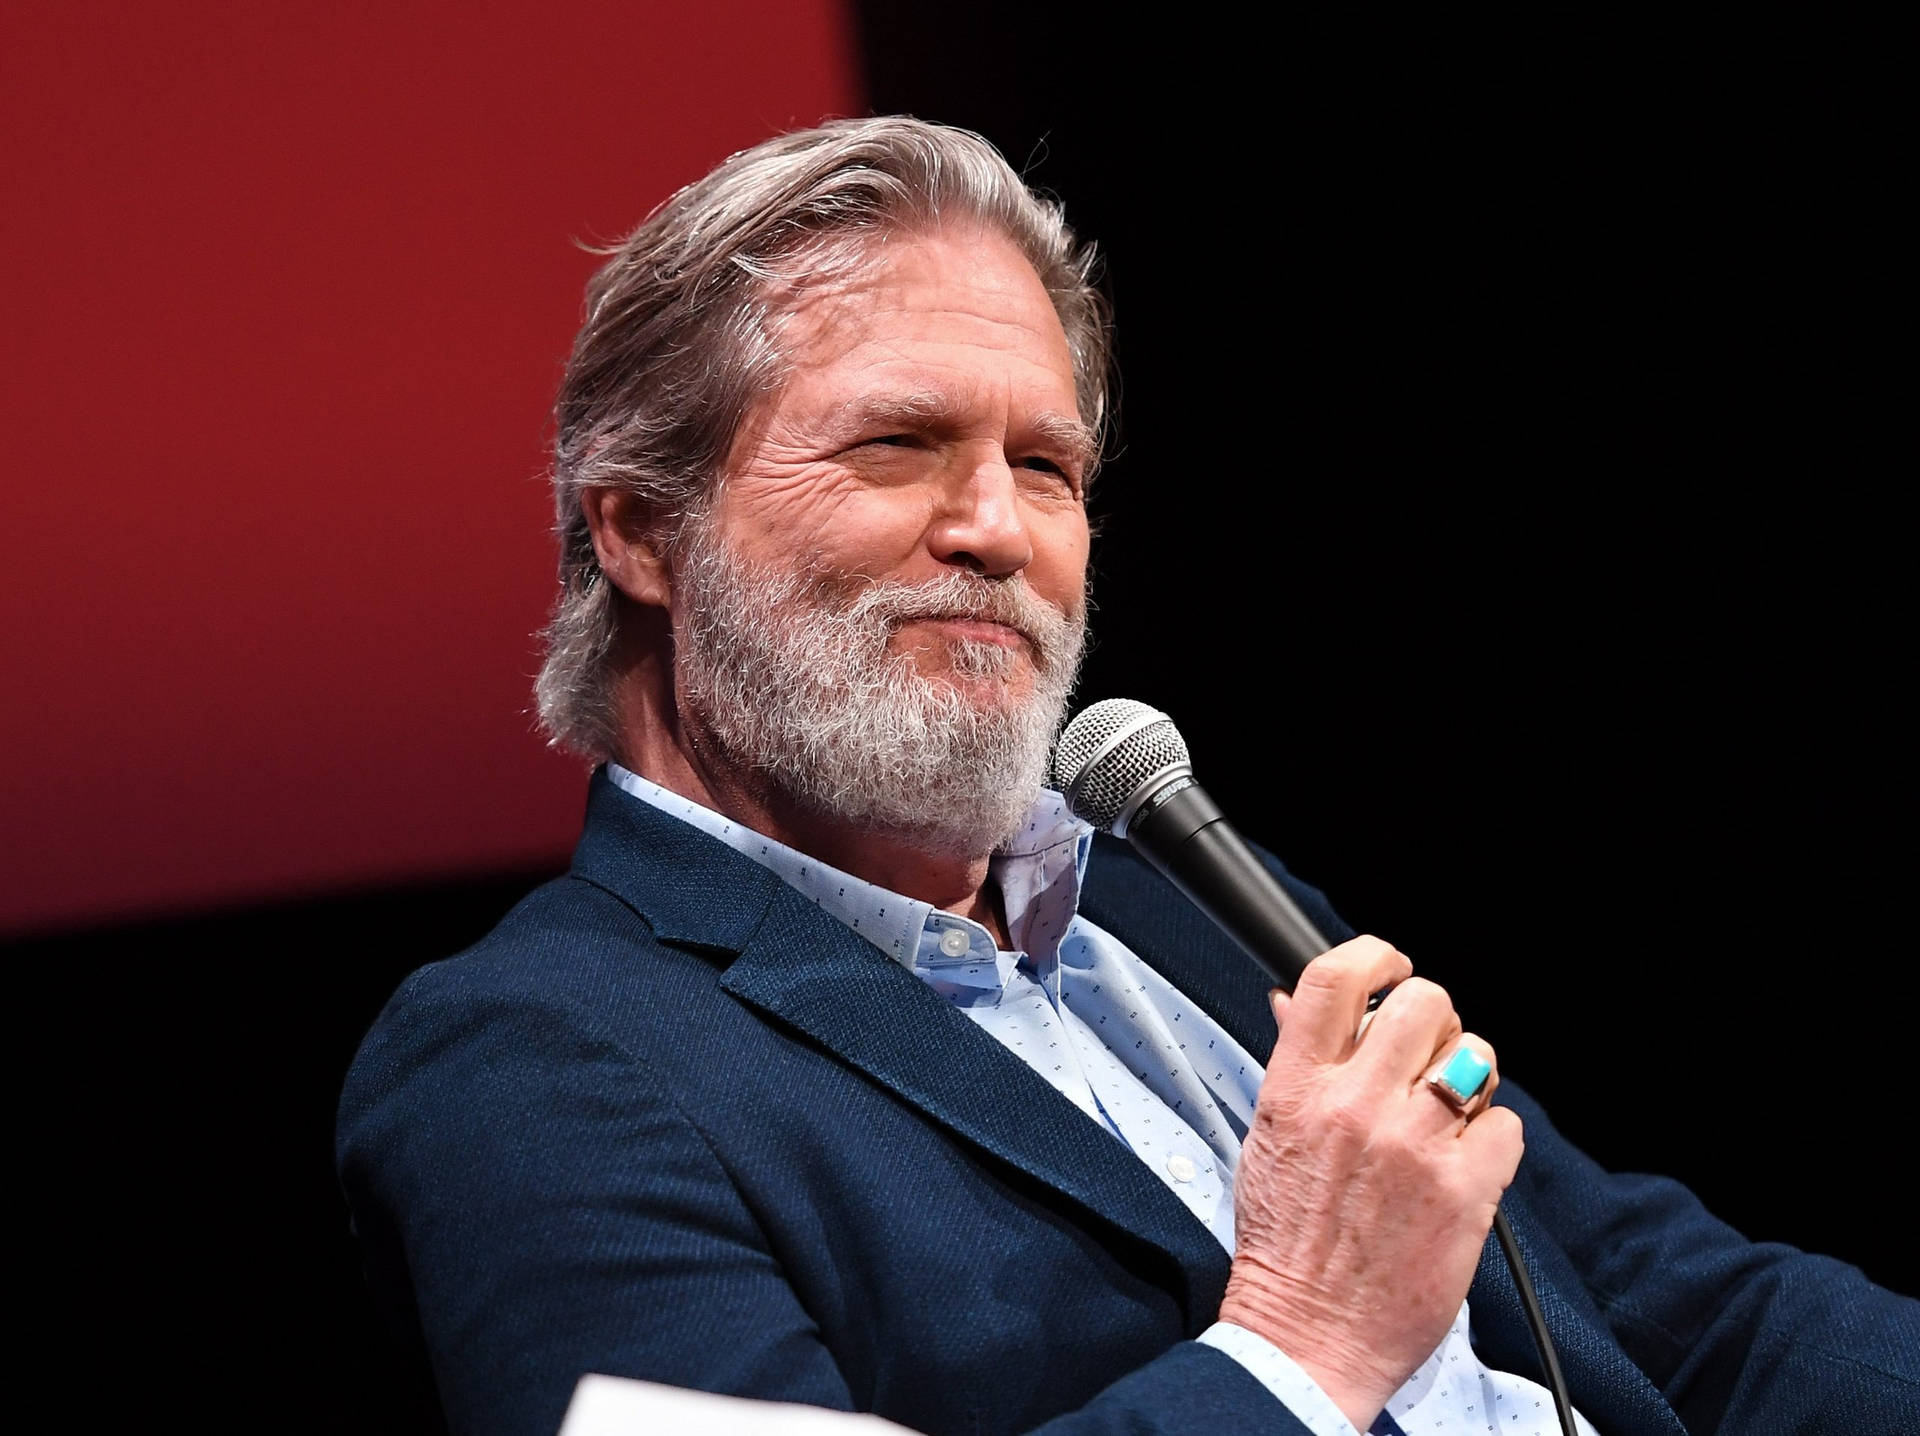 Prominent Actor Jeff Bridges Engaged in an Interview Wallpaper